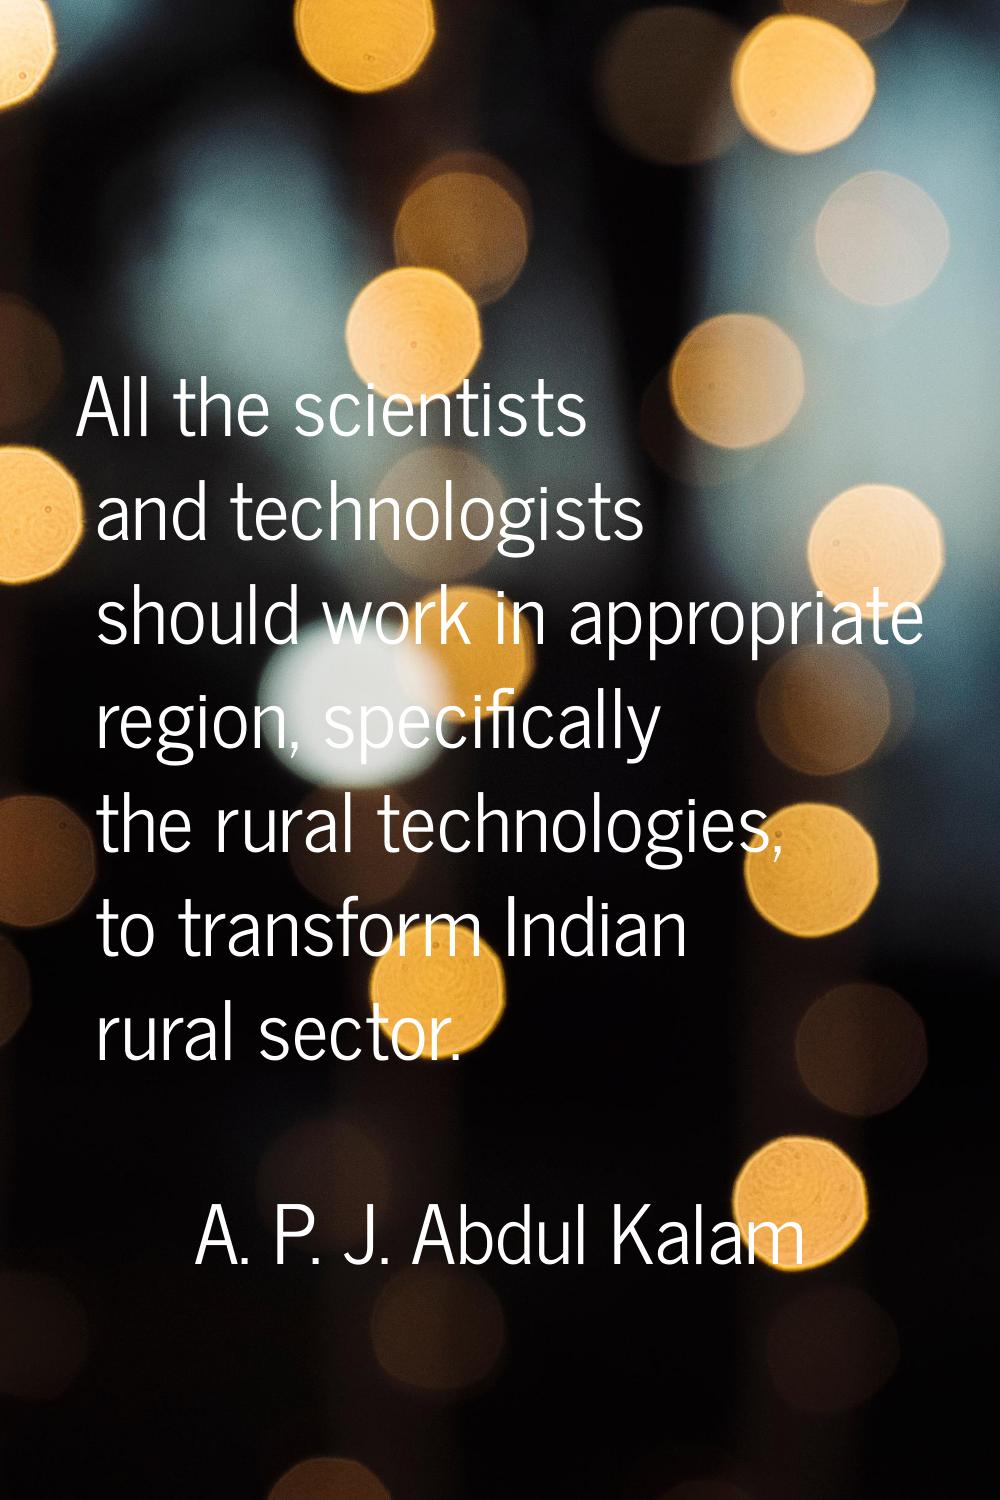 All the scientists and technologists should work in appropriate region, specifically the rural tech